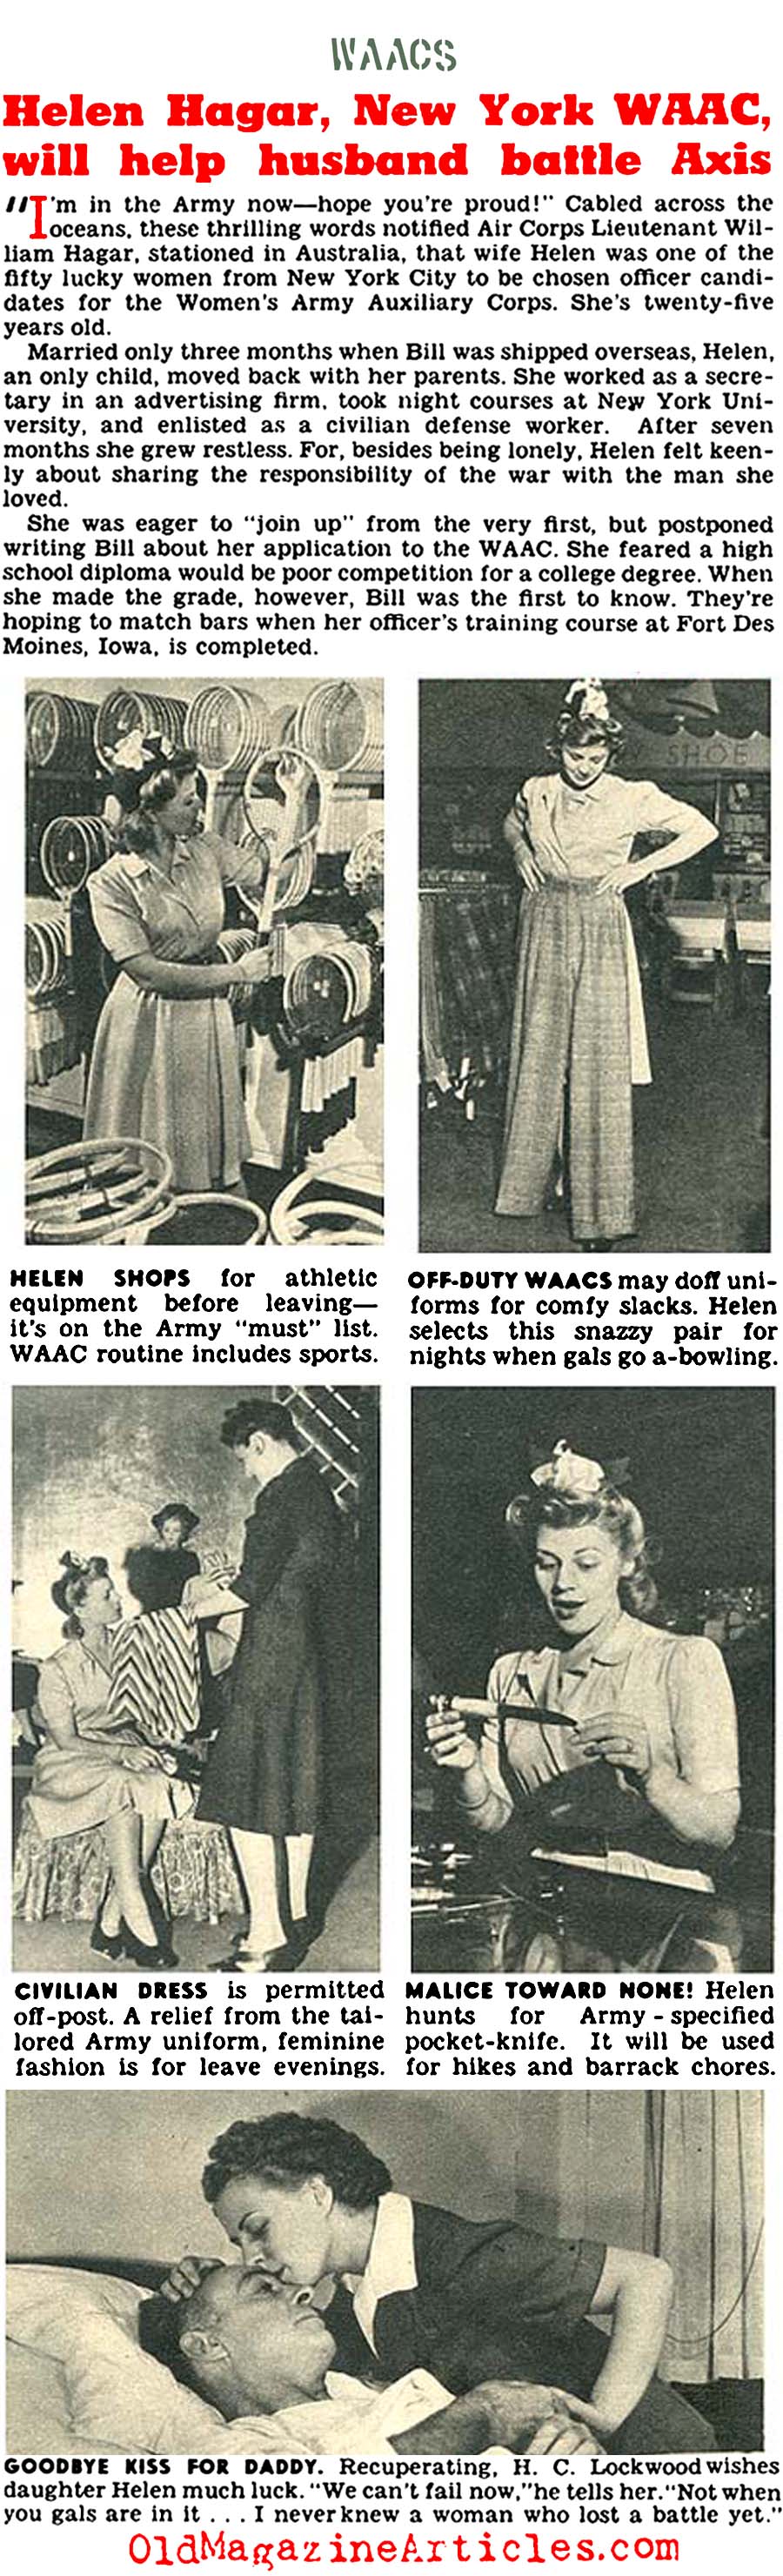 ''What Kind of Women are the WAACs?'' (Click Magazine, 1942)